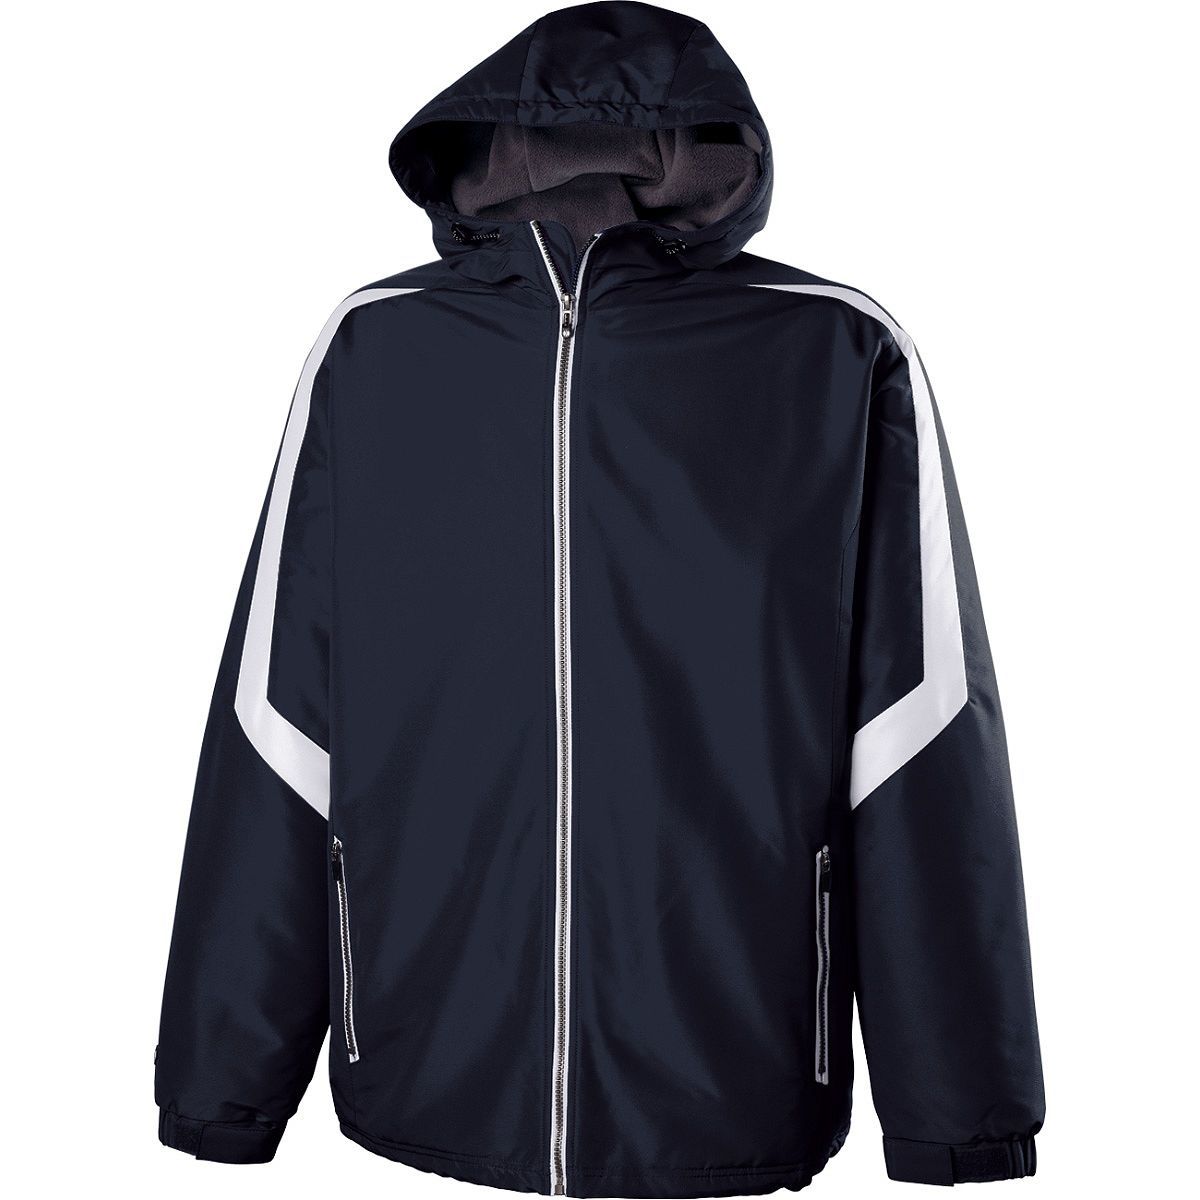 Holloway Sportswear S Charger Jacket Navy/White 229059 - image 4 of 4